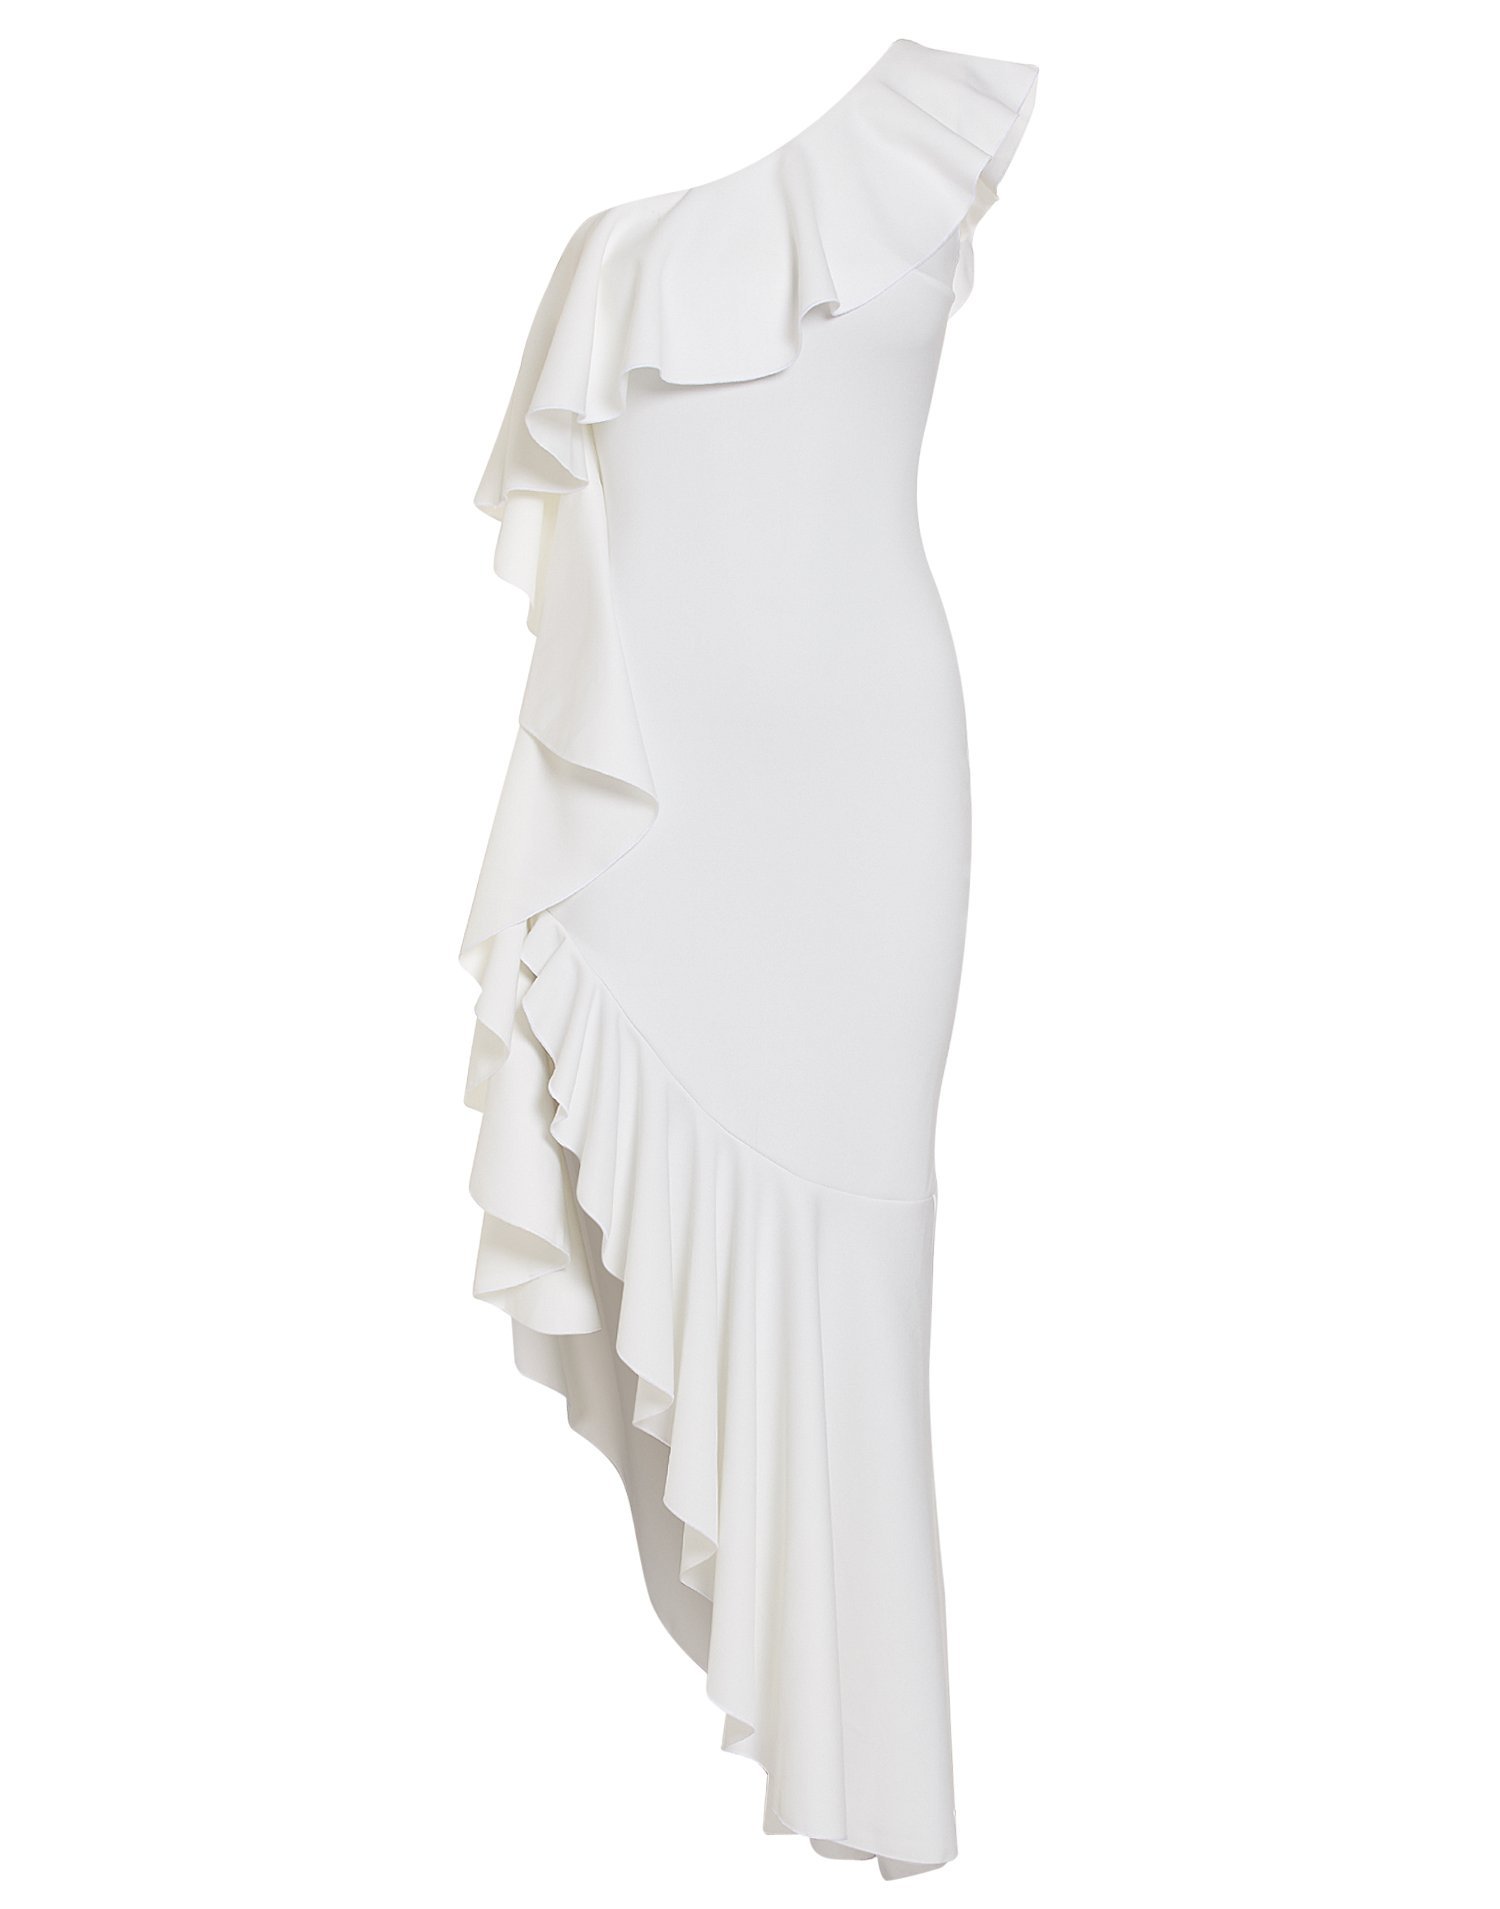 Asymmetric Frill Dress - Nly One - White - Party Dresses - Clothing ...